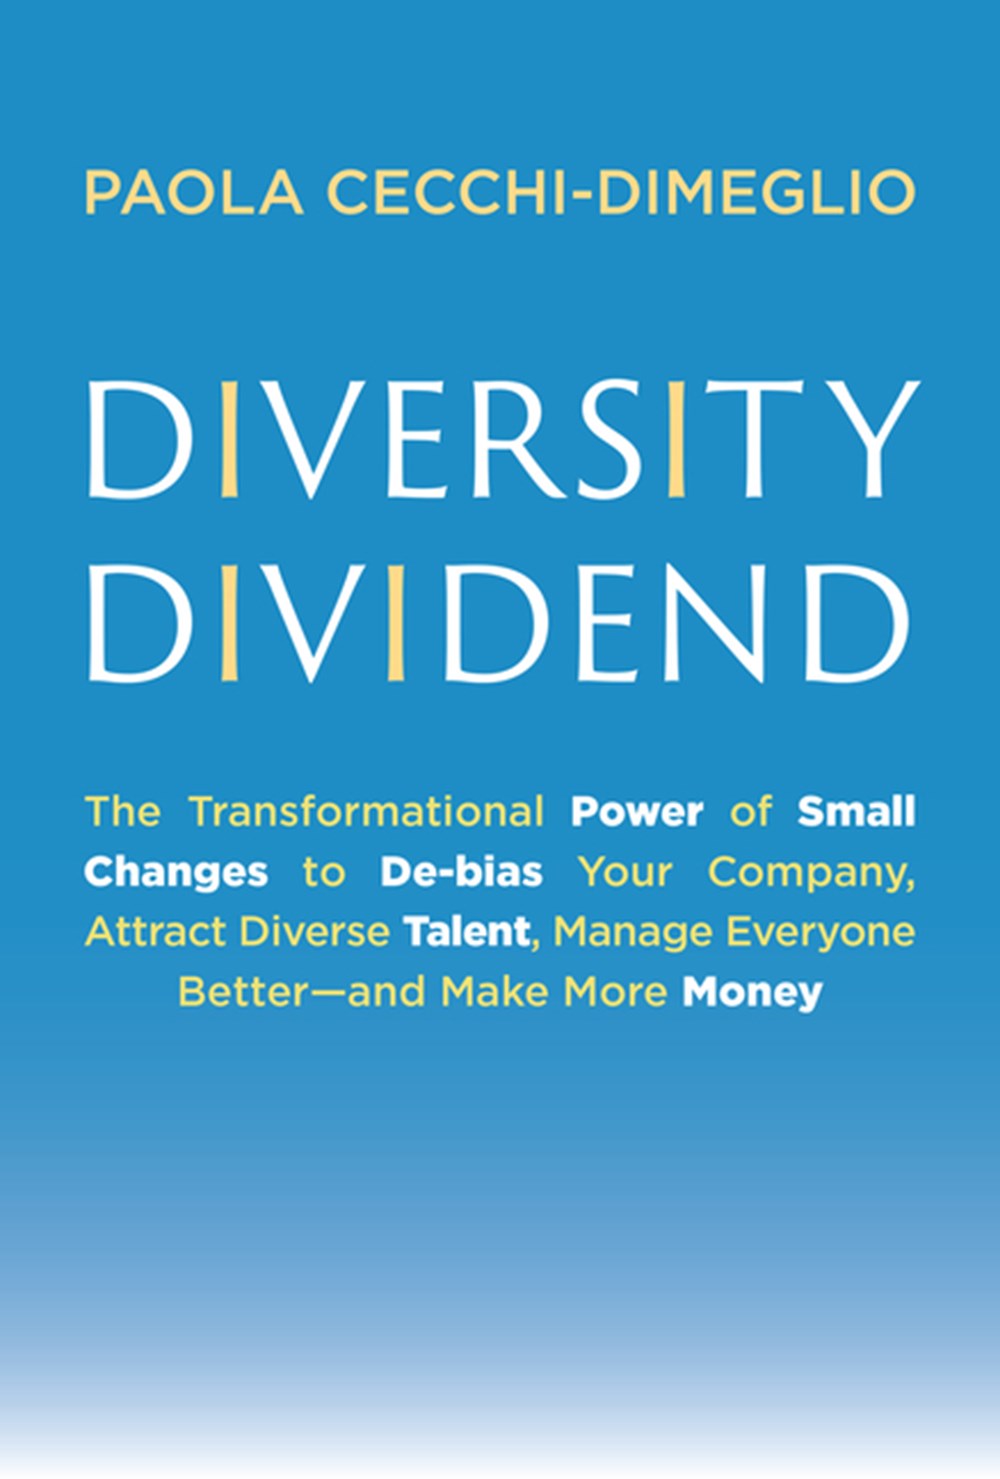 Diversity Dividend: The Transformational Power of Small Changes to Debias Your Company, Attract Divr